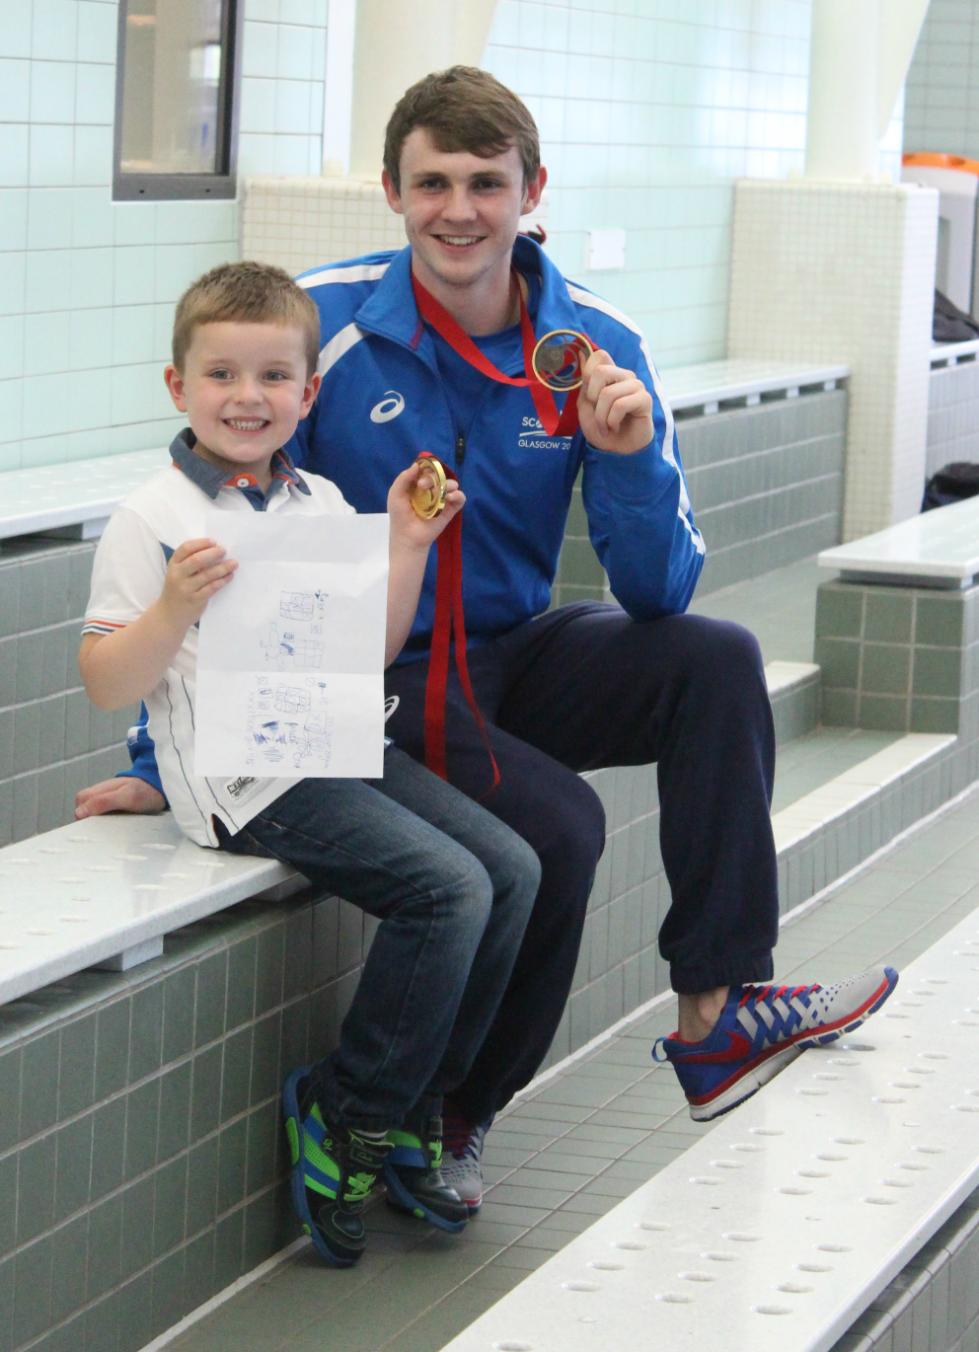 Stirling swimmer Ross Murdoch with the little fan he traced through Twitter, Brian Fitzpatrick.